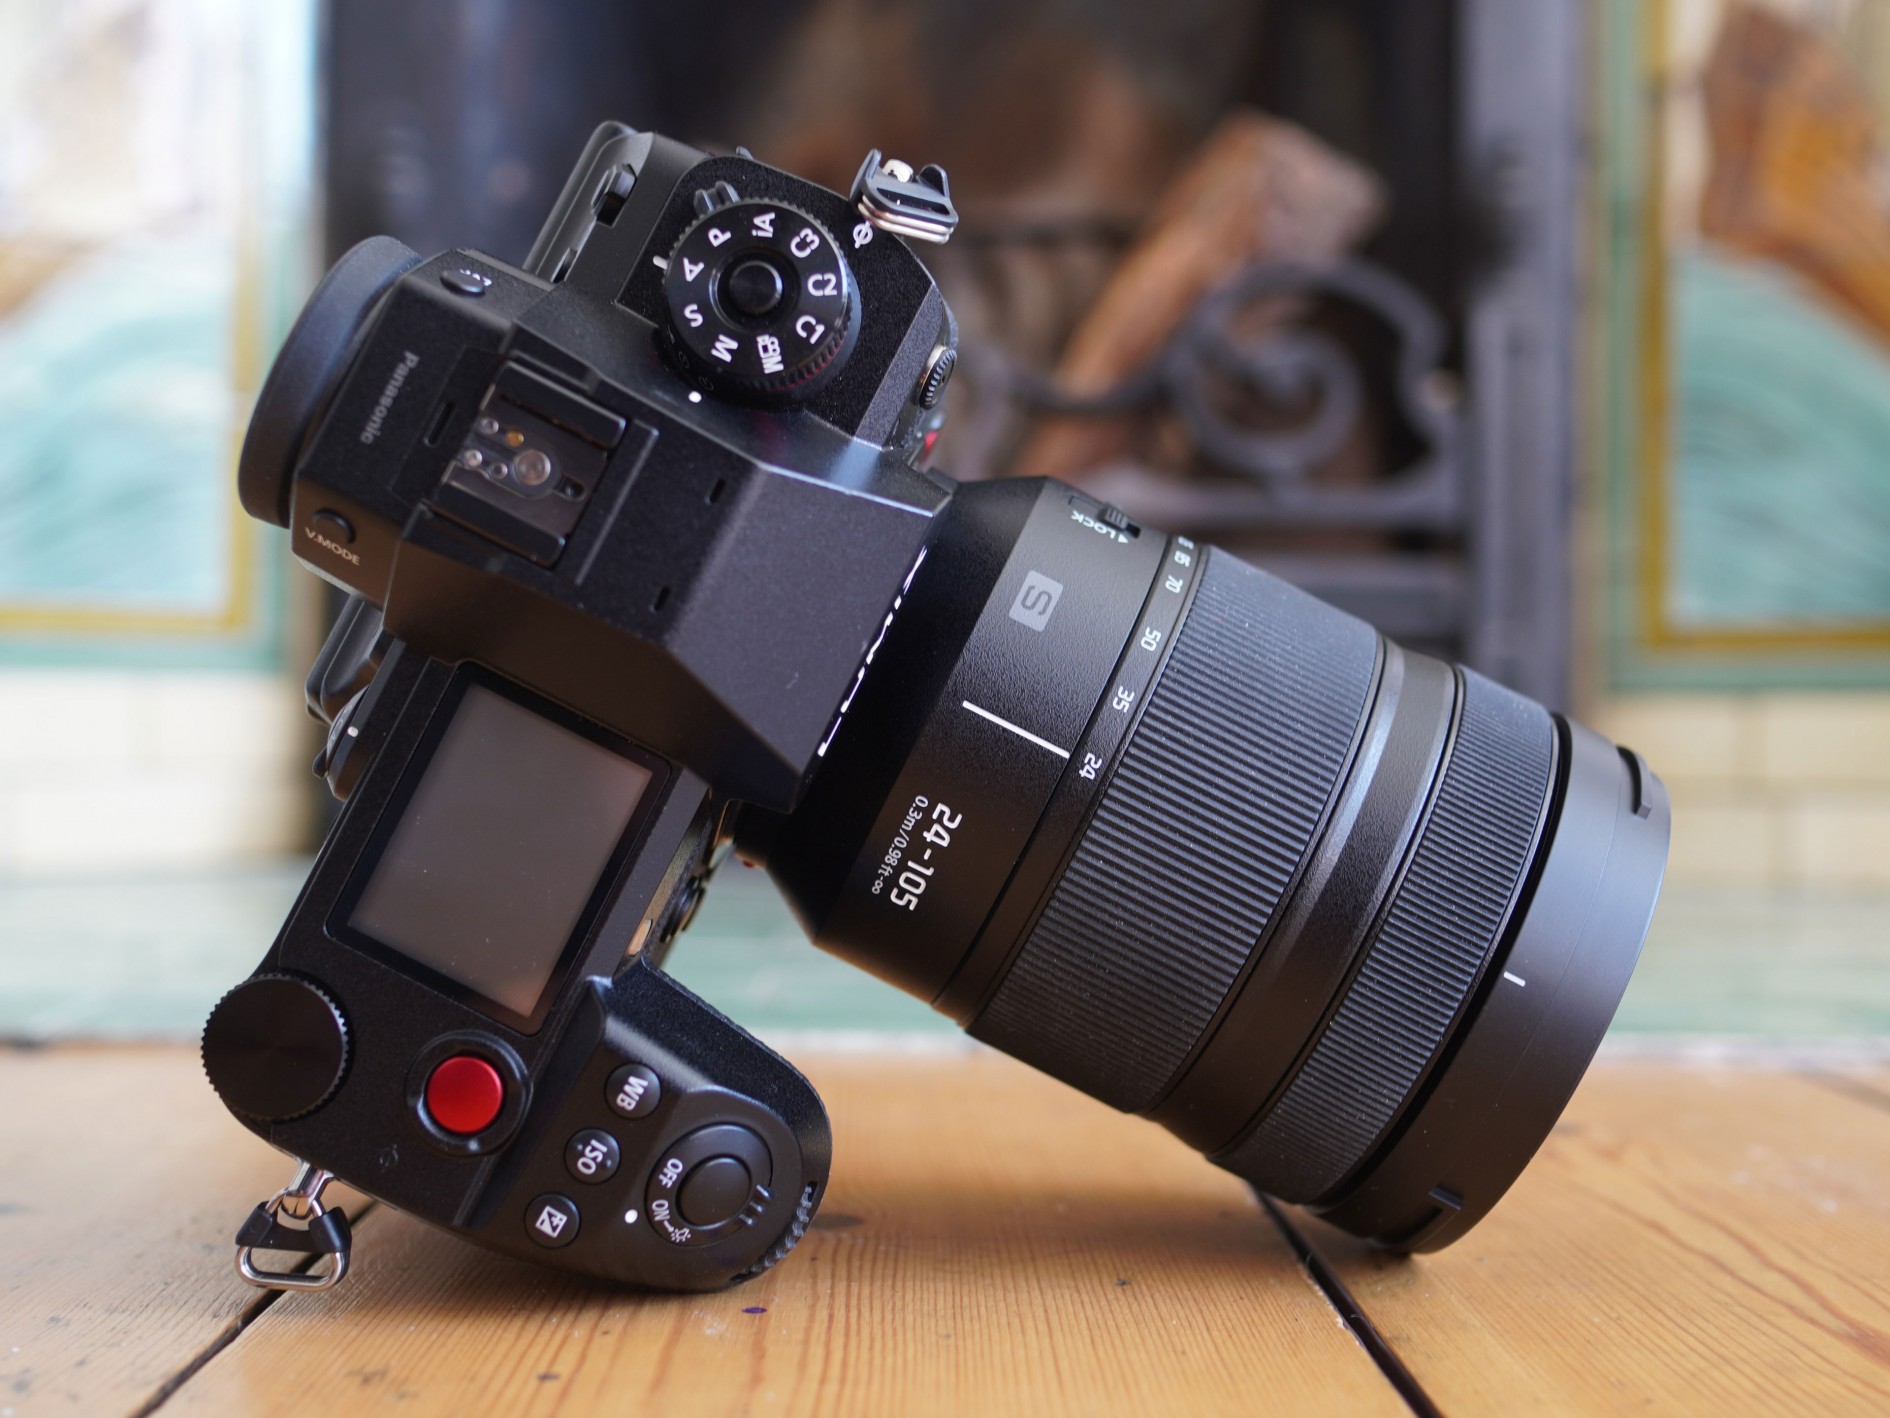 How To Update Canon Rp Firmware